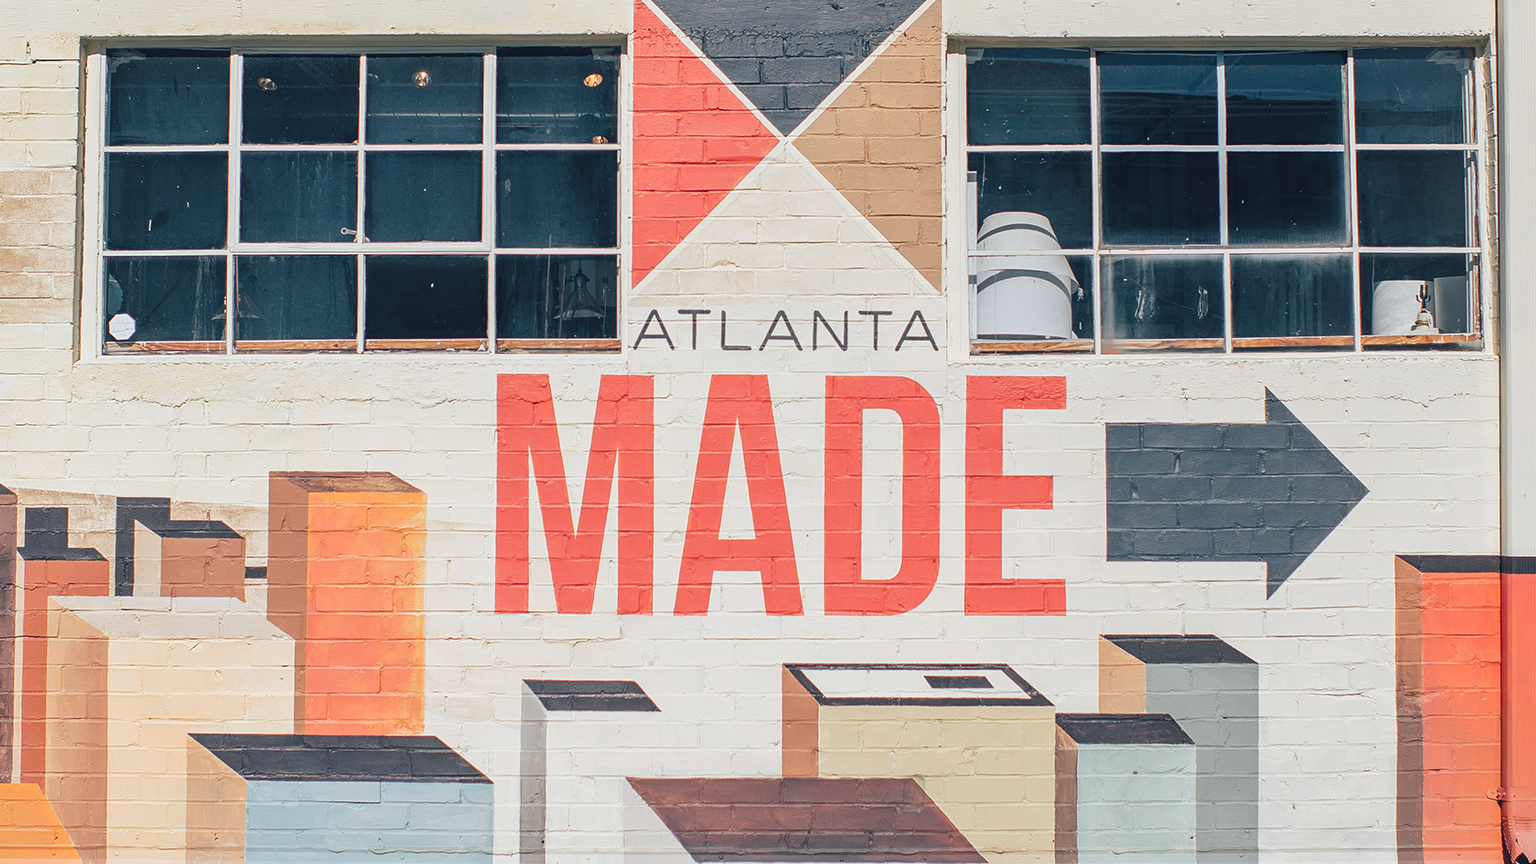 Building mural with a cityscape and the text Atlanta Made. Photo by Ian Schneider on Unsplash.